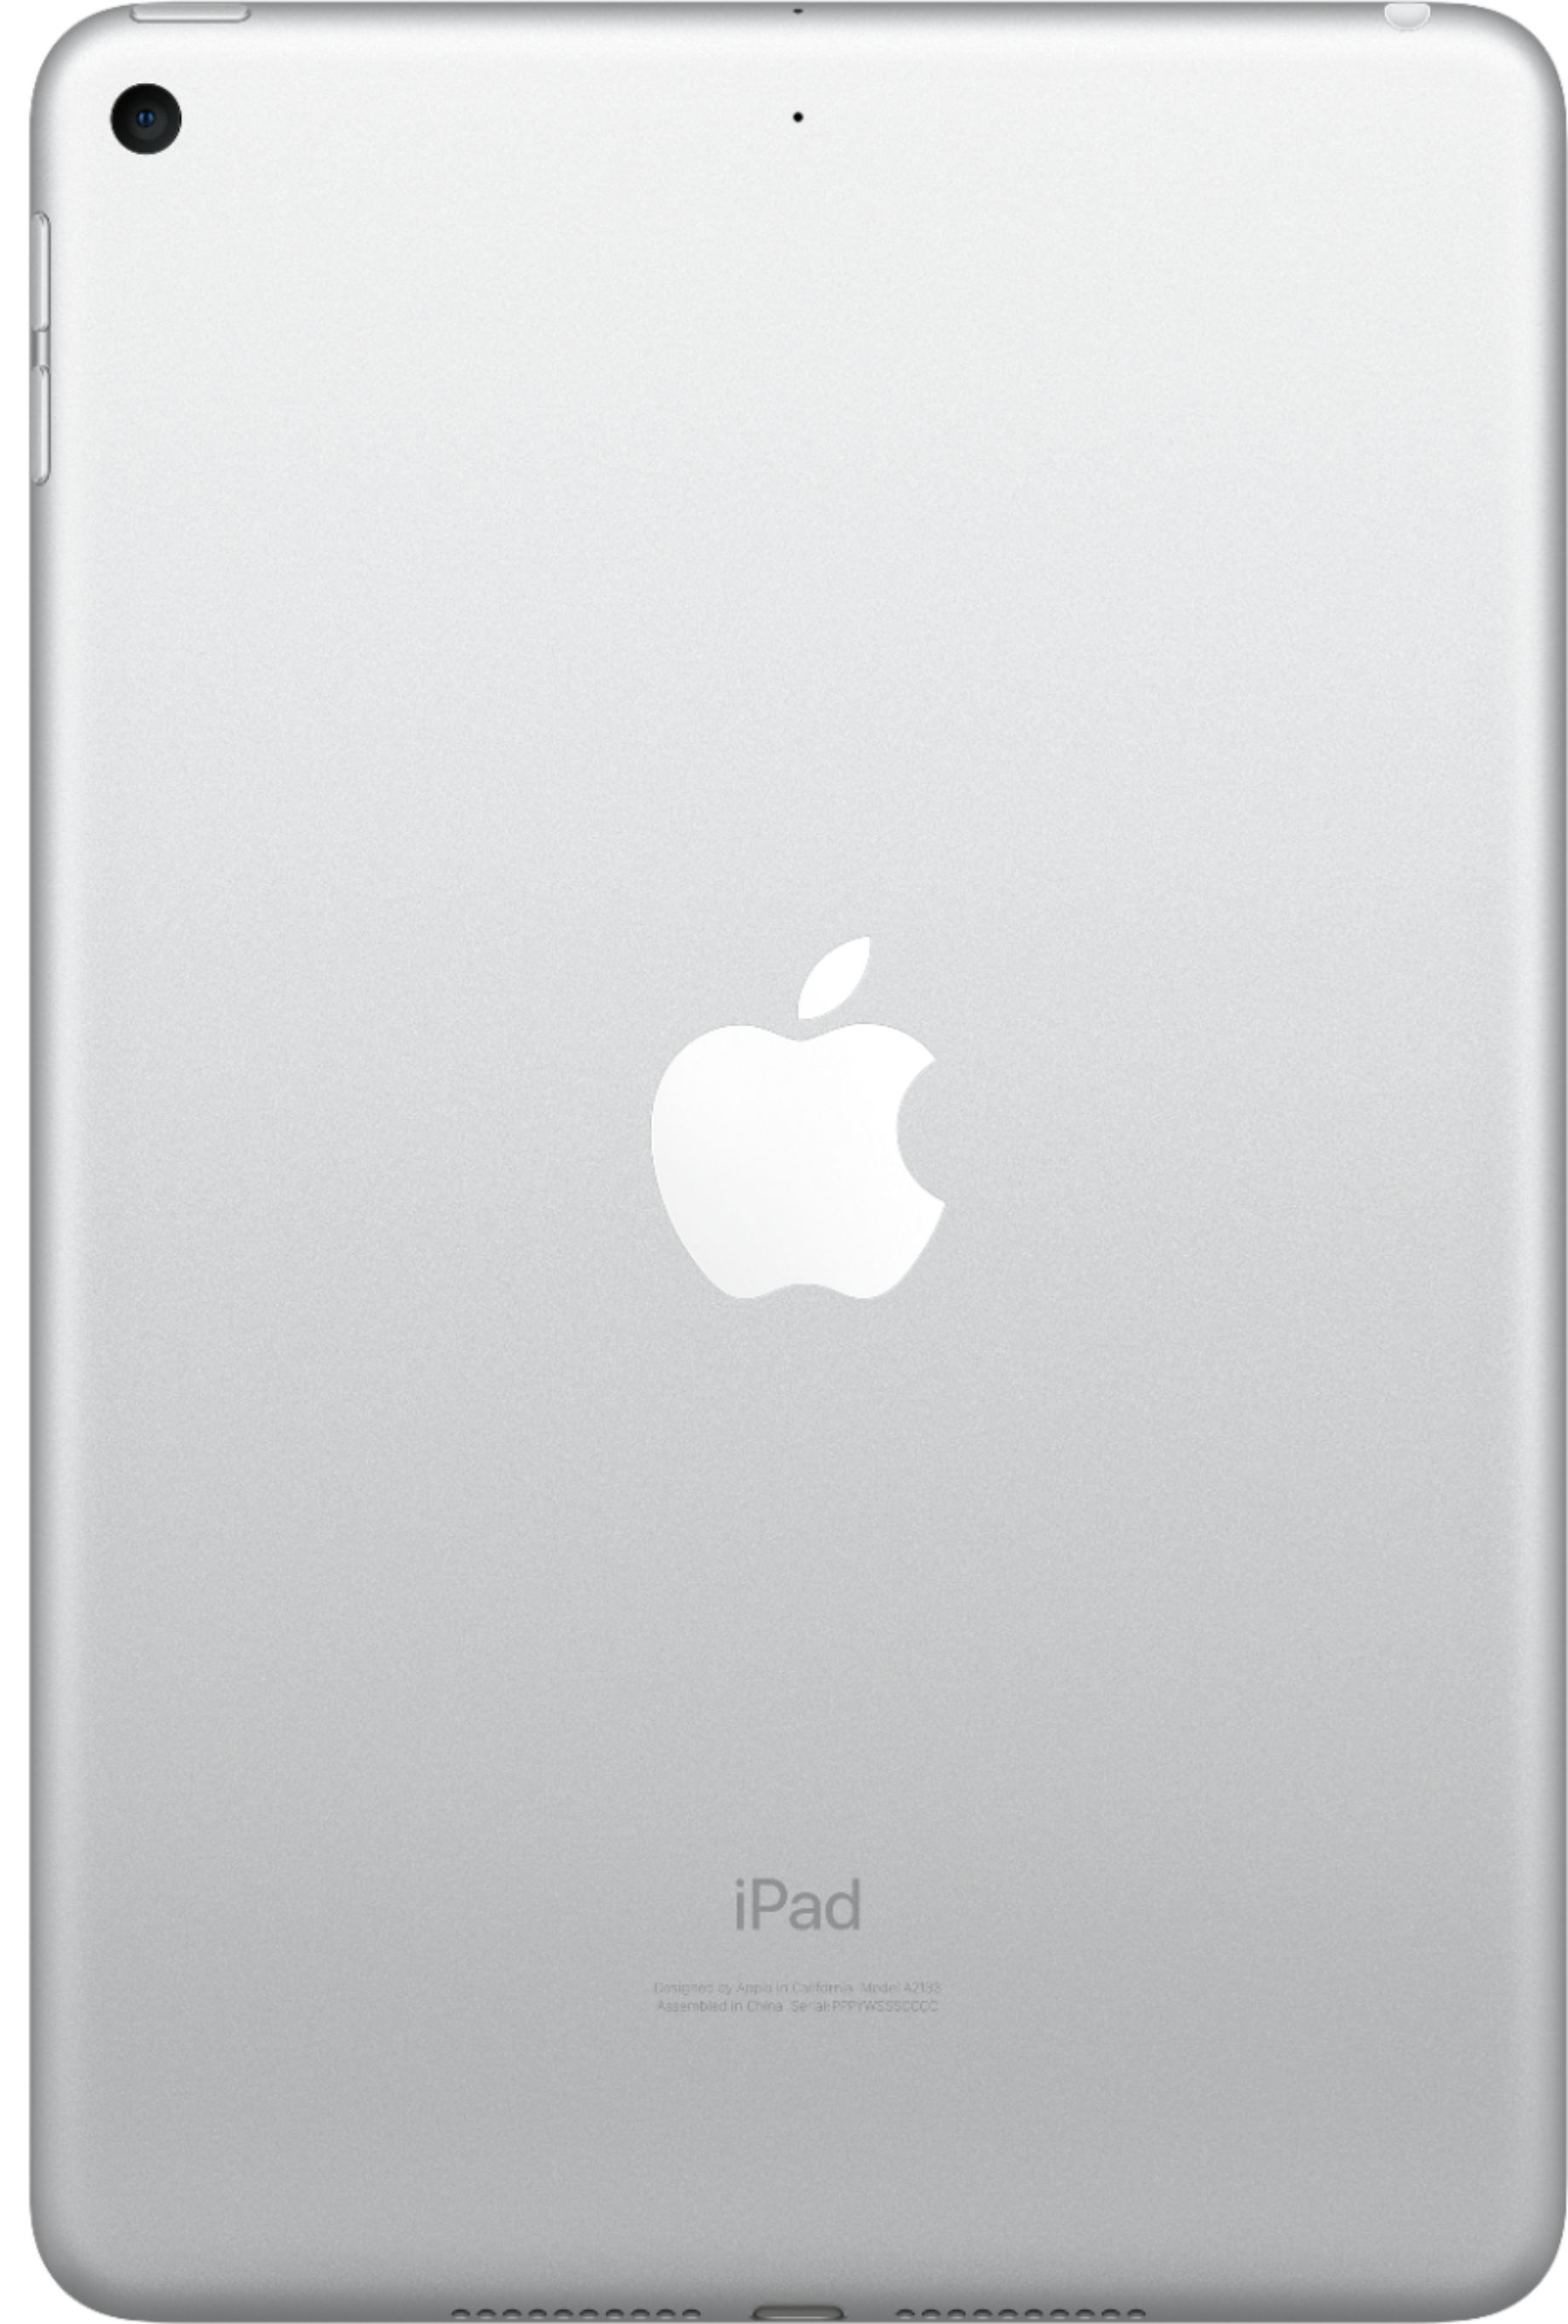 Back View: AppleCare+ for iPad - 2 Year Plan